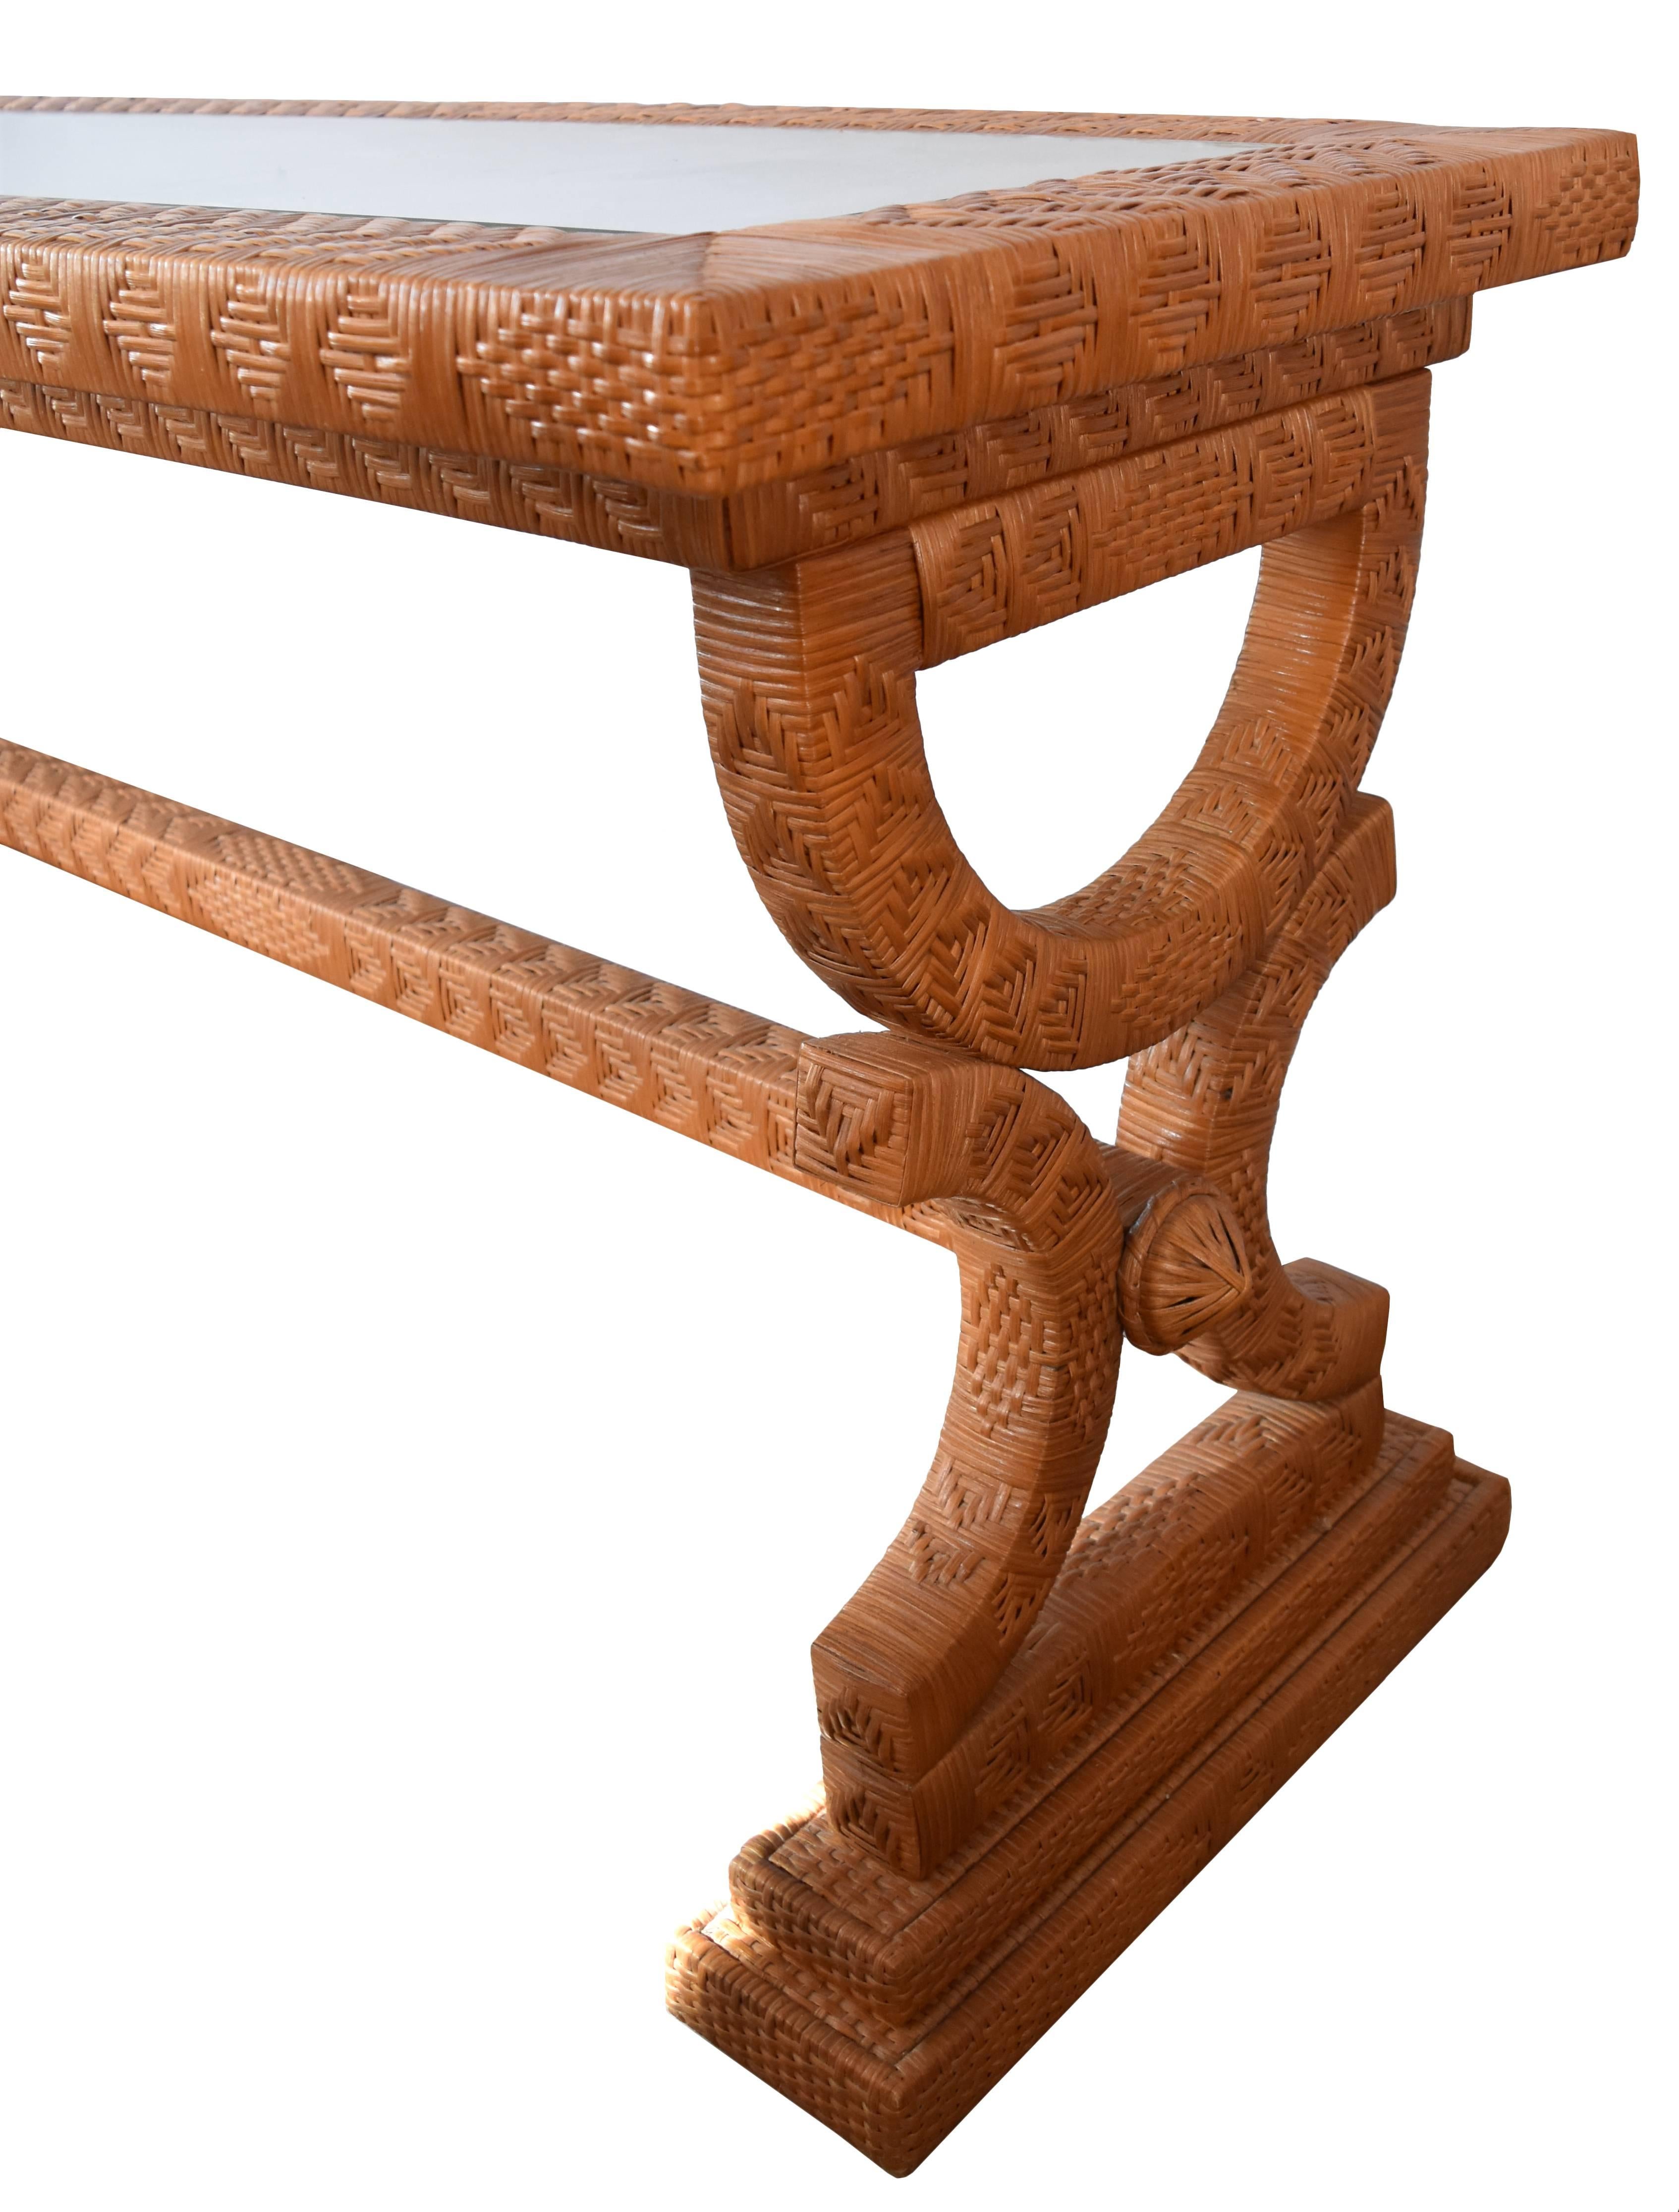 Classically styled joined table legs. Wooden structure under the intricately weaved rattan pattern. In pristine condition.
  